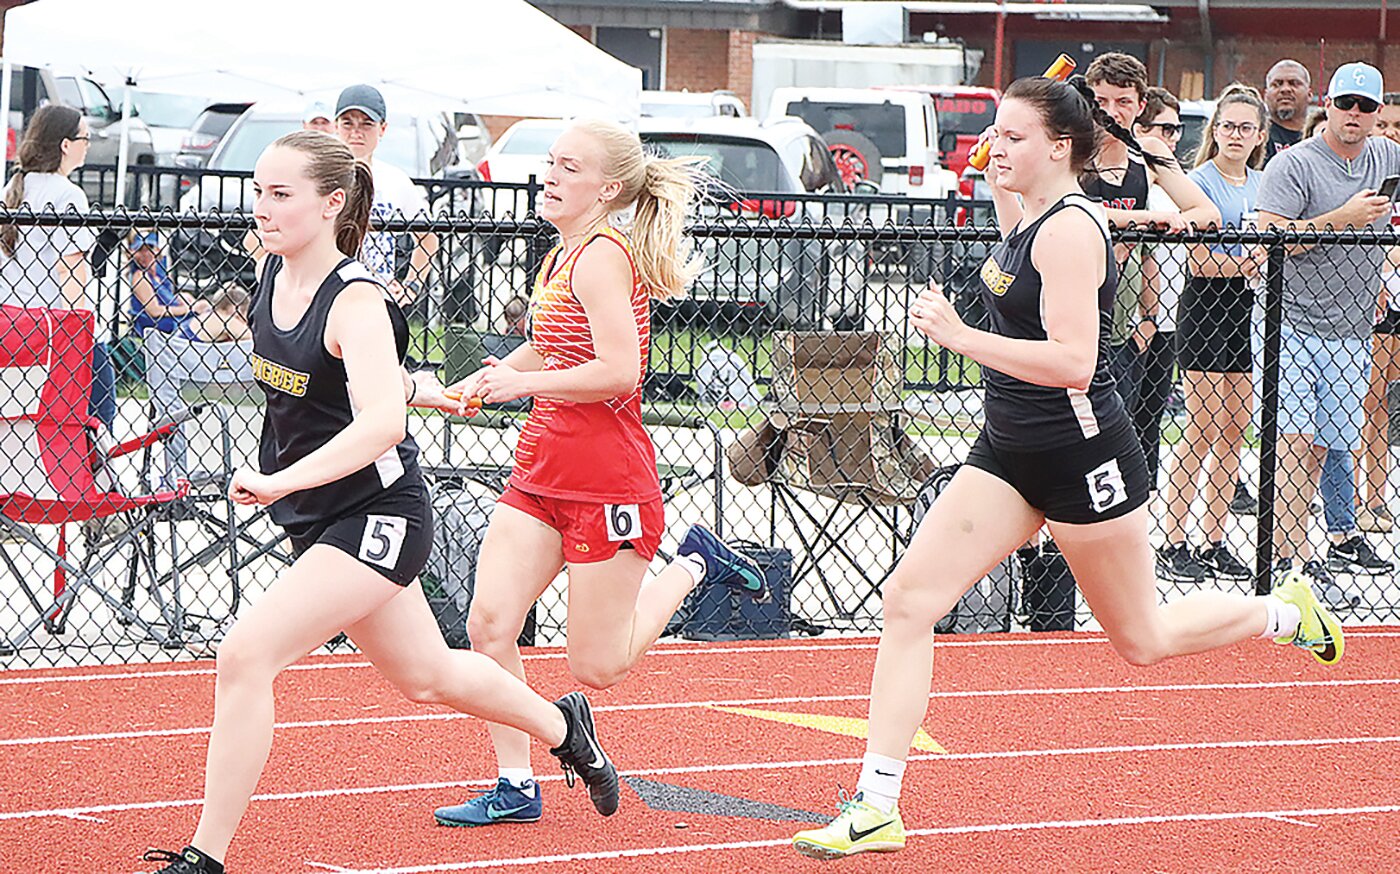 Higbee's Joey Westfall (left) prepares to accept the baton from teammate Isabelle Welch during the Class 1 Section 2 meet at South Shelby High School in Shelbina.